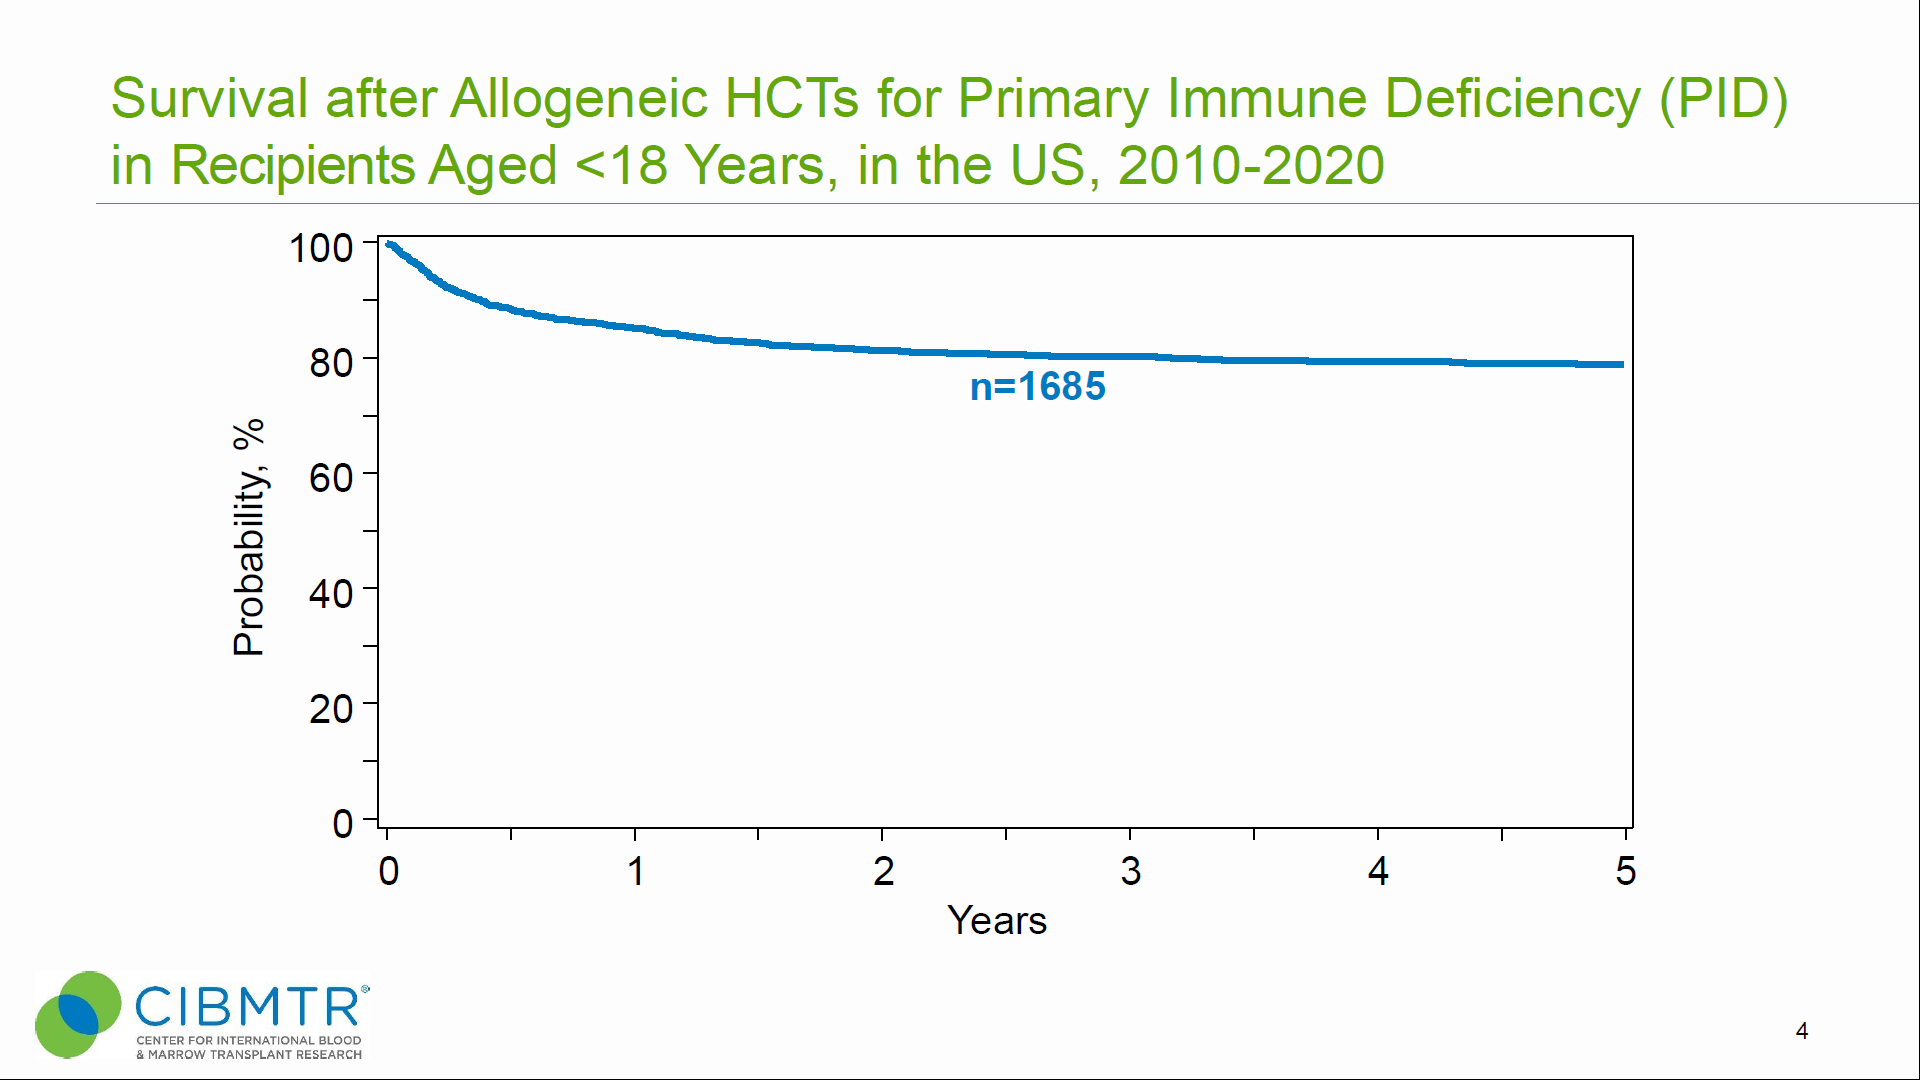 Figure 1 Survival after Allogeneic HCTs for Primary Immune Deficiency (PID)